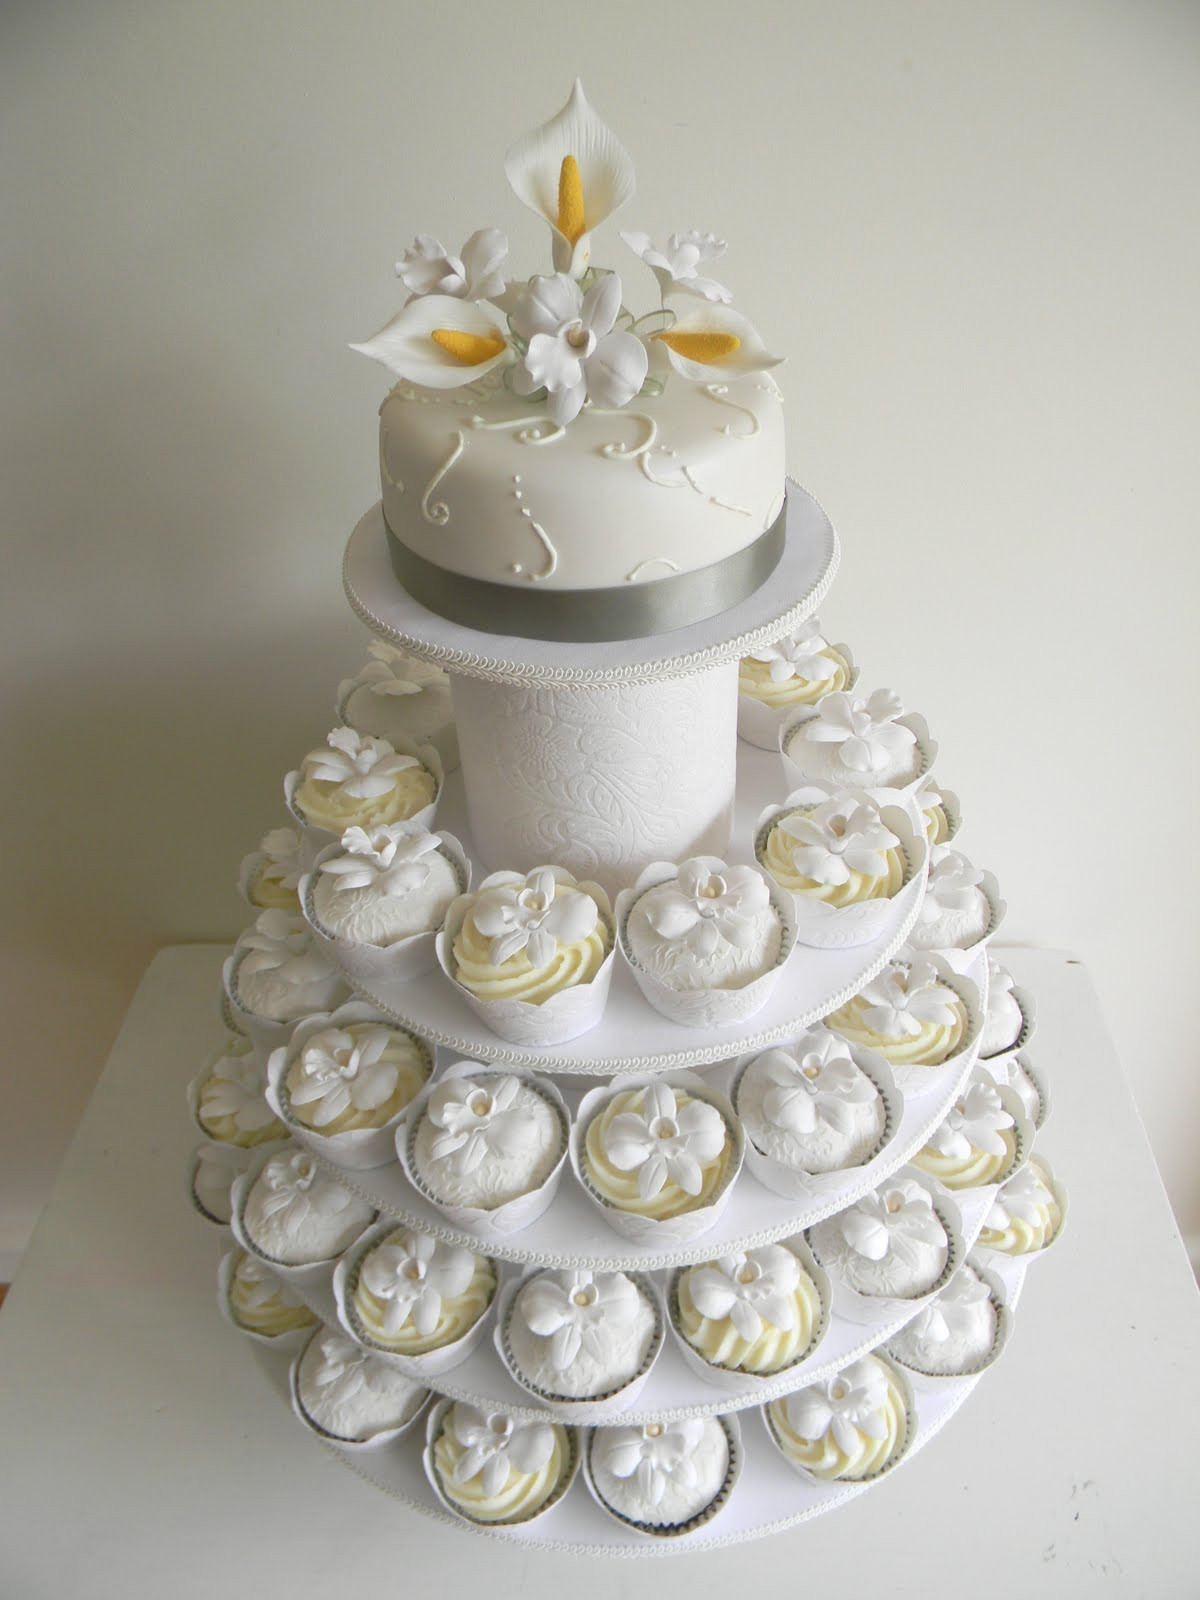 Small Simple Wedding Cakes
 25 CUTE SMALL WEDDING CAKES FOR THE SPECIAL OCCASSION